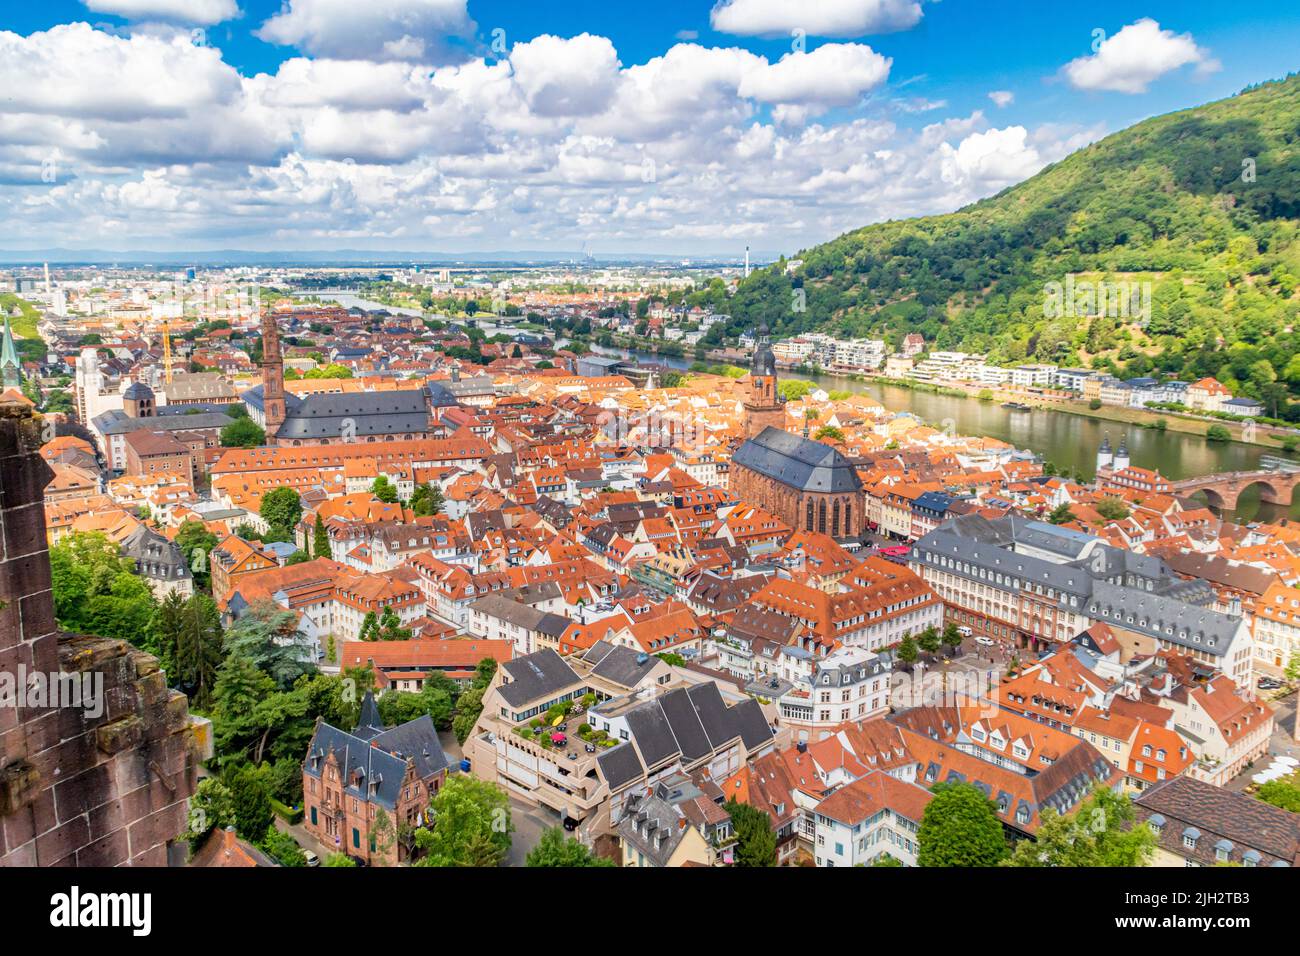 beautiful view of the old town of Heidelberg in summer. Heidelberg on the Neckar River in Germany is known for its university and romantic flair Stock Photo